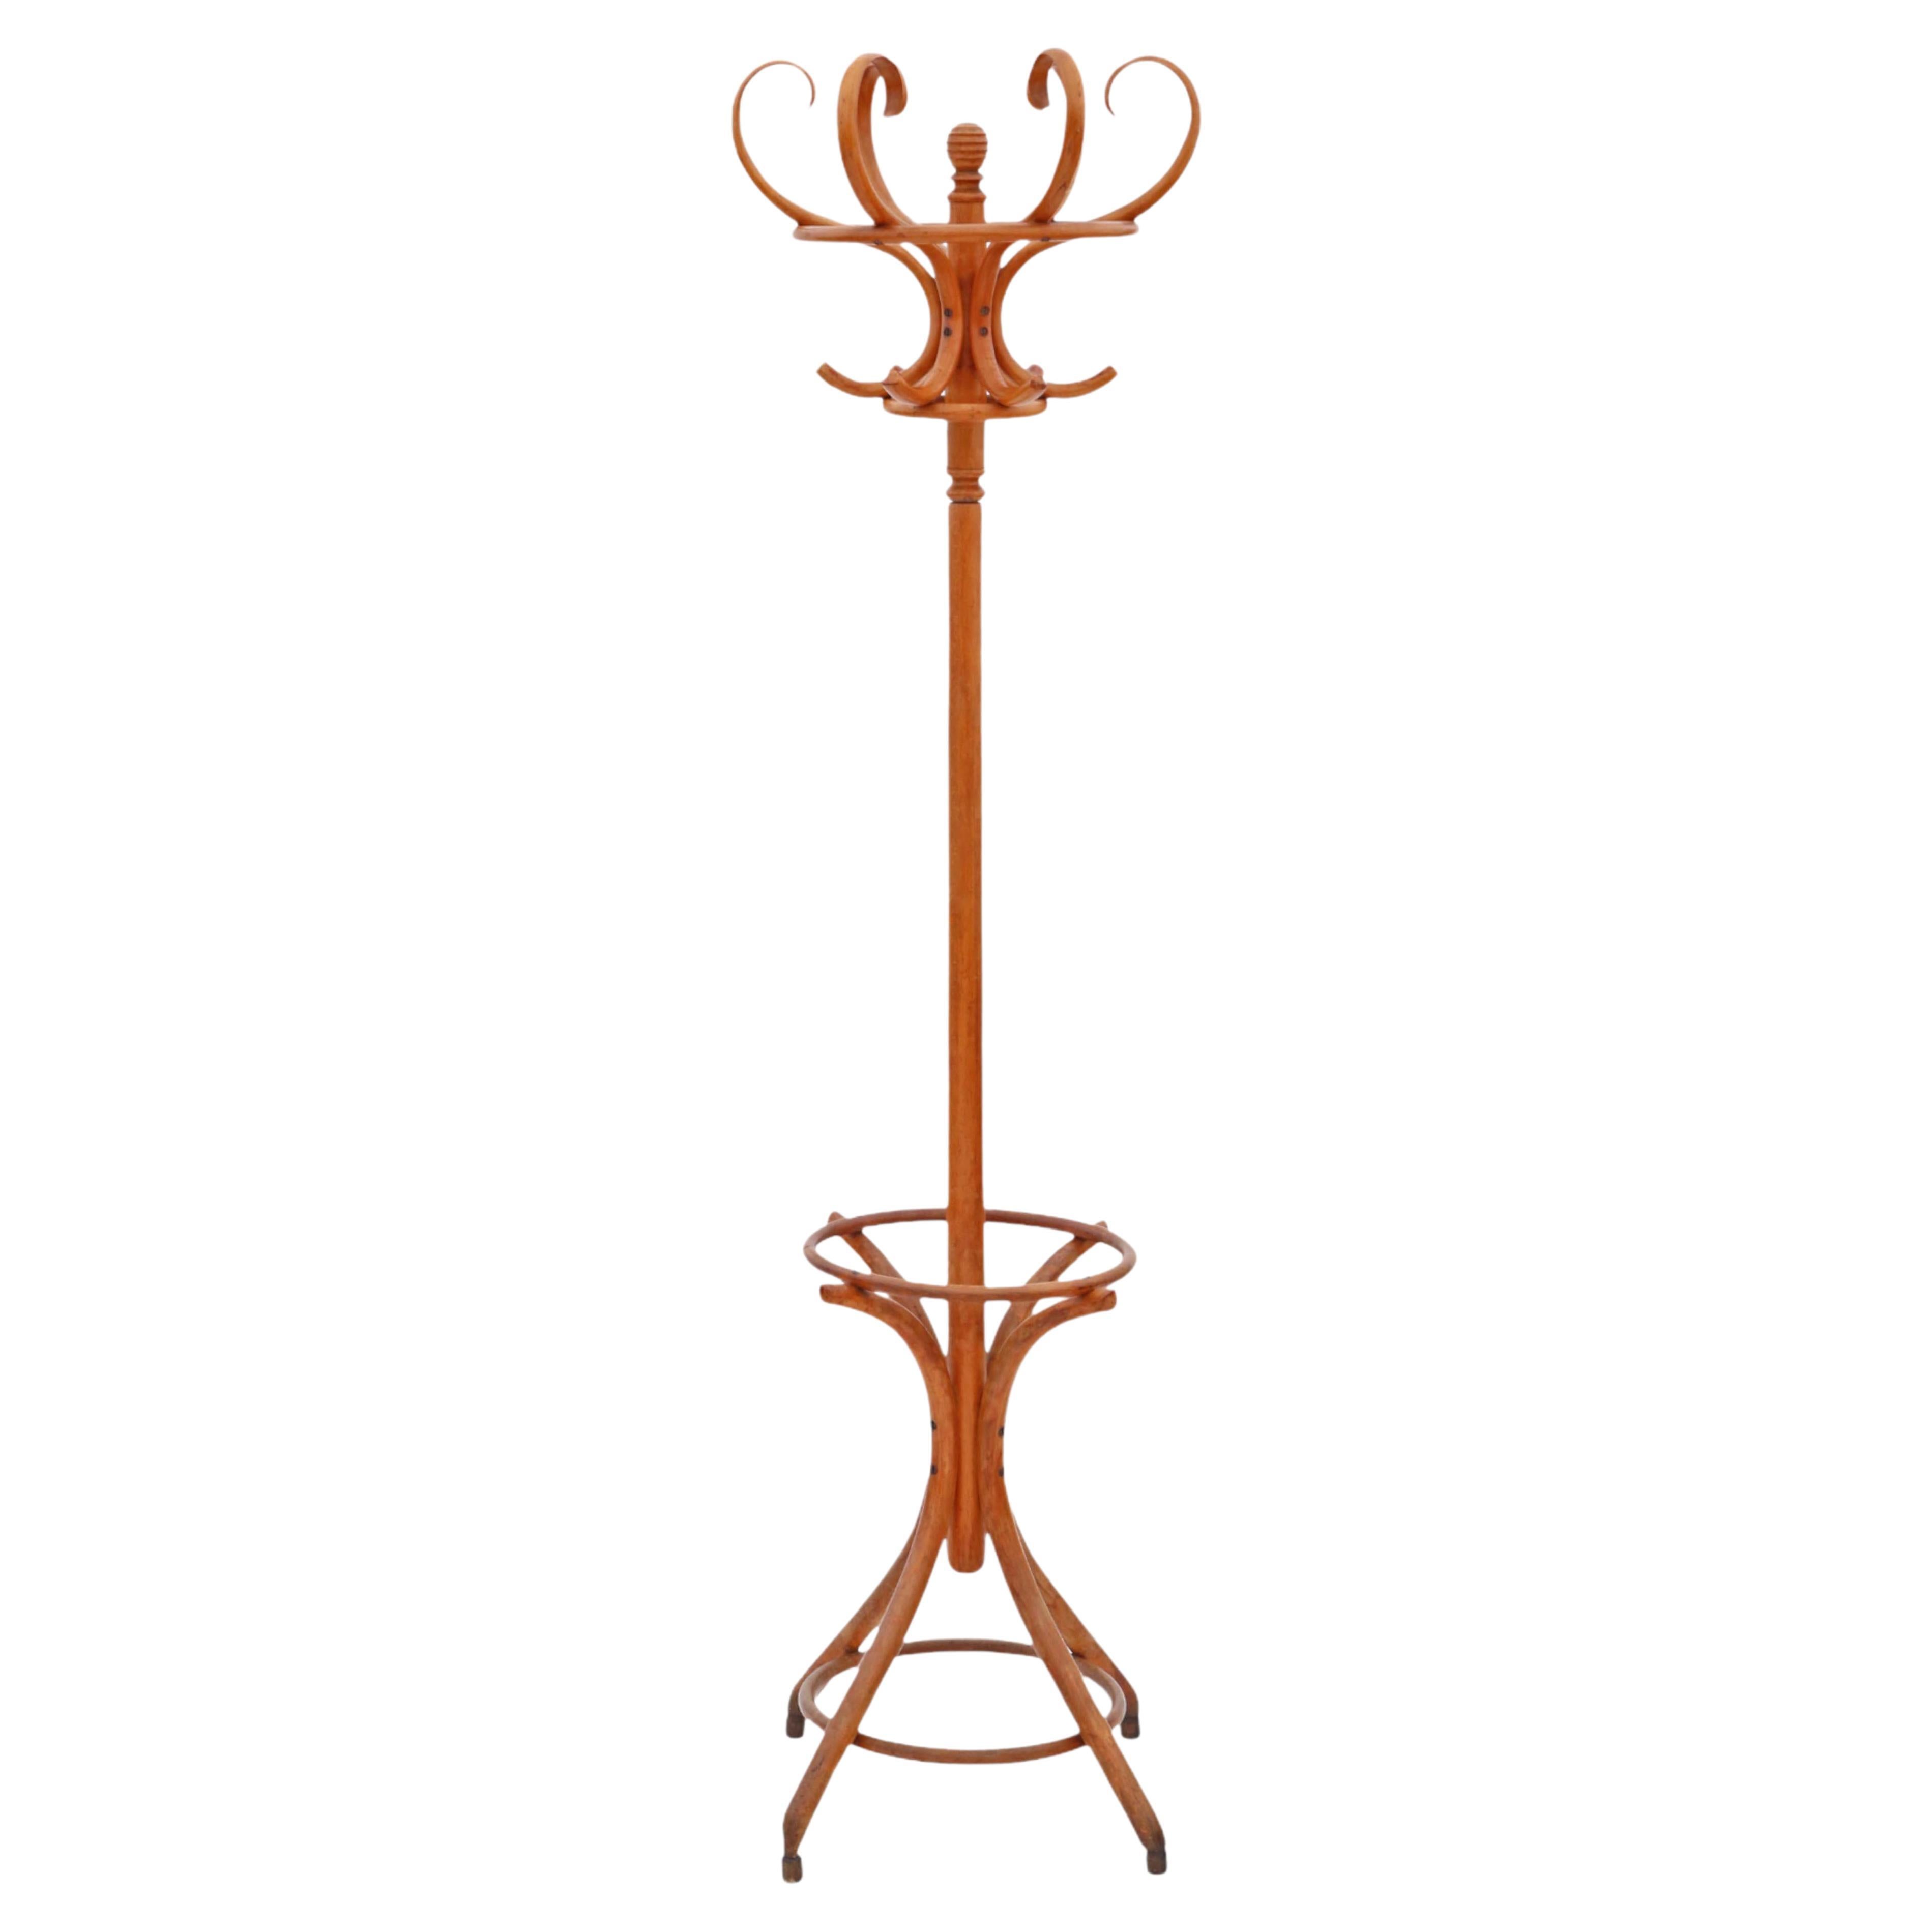 Vintage mid-20th Century bentwood hall, coat or hat stand